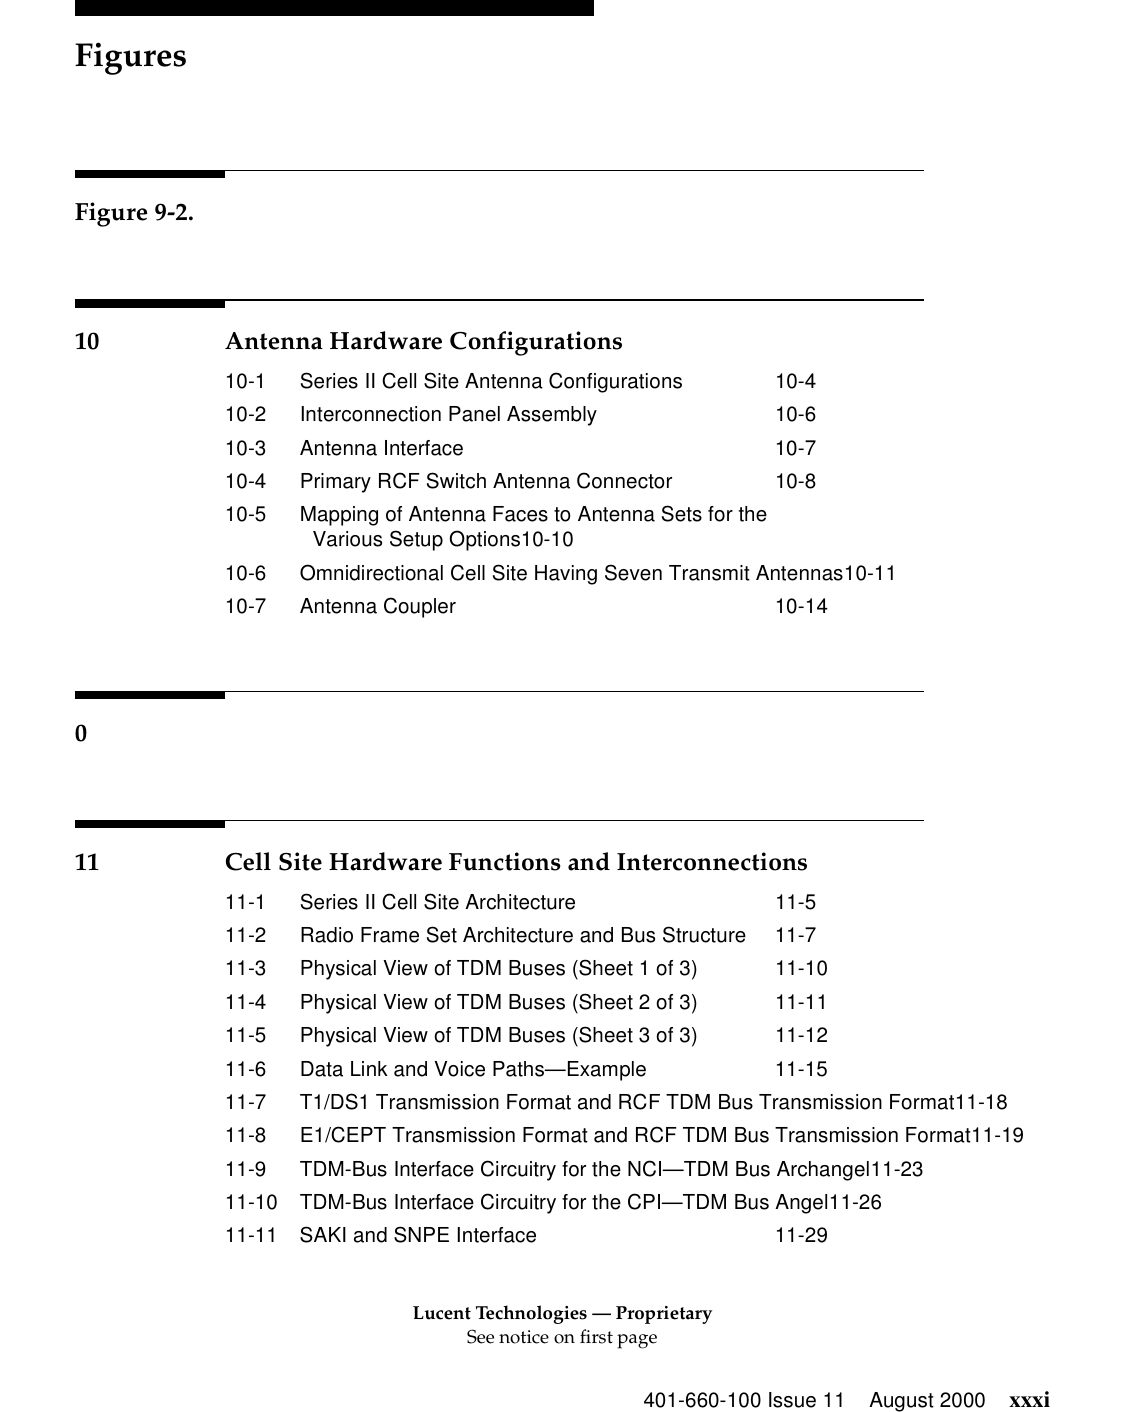 Lucent Technologies — ProprietarySee notice on first pageFigures401-660-100 Issue 11 August 2000 xxxiFigure 9-2.10 Antenna Hardware Configurations10-1 Series II Cell Site Antenna Configurations 10-410-2 Interconnection Panel Assembly 10-610-3 Antenna Interface 10-710-4 Primary RCF Switch Antenna Connector 10-810-5 Mapping of Antenna Faces to Antenna Sets for theVarious Setup Options10-1010-6 Omnidirectional Cell Site Having Seven Transmit Antennas10-1110-7 Antenna Coupler 10-14011 Cell Site Hardware Functions and Interconnections11-1 Series II Cell Site Architecture 11-511-2 Radio Frame Set Architecture and Bus Structure 11-711-3 Physical View of TDM Buses (Sheet 1 of 3) 11-1011-4 Physical View of TDM Buses (Sheet 2 of 3) 11-1111-5 Physical View of TDM Buses (Sheet 3 of 3) 11-1211-6 Data Link and Voice Paths—Example 11-1511-7 T1/DS1 Transmission Format and RCF TDM Bus Transmission Format11-1811-8 E1/CEPT Transmission Format and RCF TDM Bus Transmission Format11-1911-9 TDM-Bus Interface Circuitry for the NCI—TDM Bus Archangel11-2311-10 TDM-Bus Interface Circuitry for the CPI—TDM Bus Angel11-2611-11 SAKI and SNPE Interface 11-29